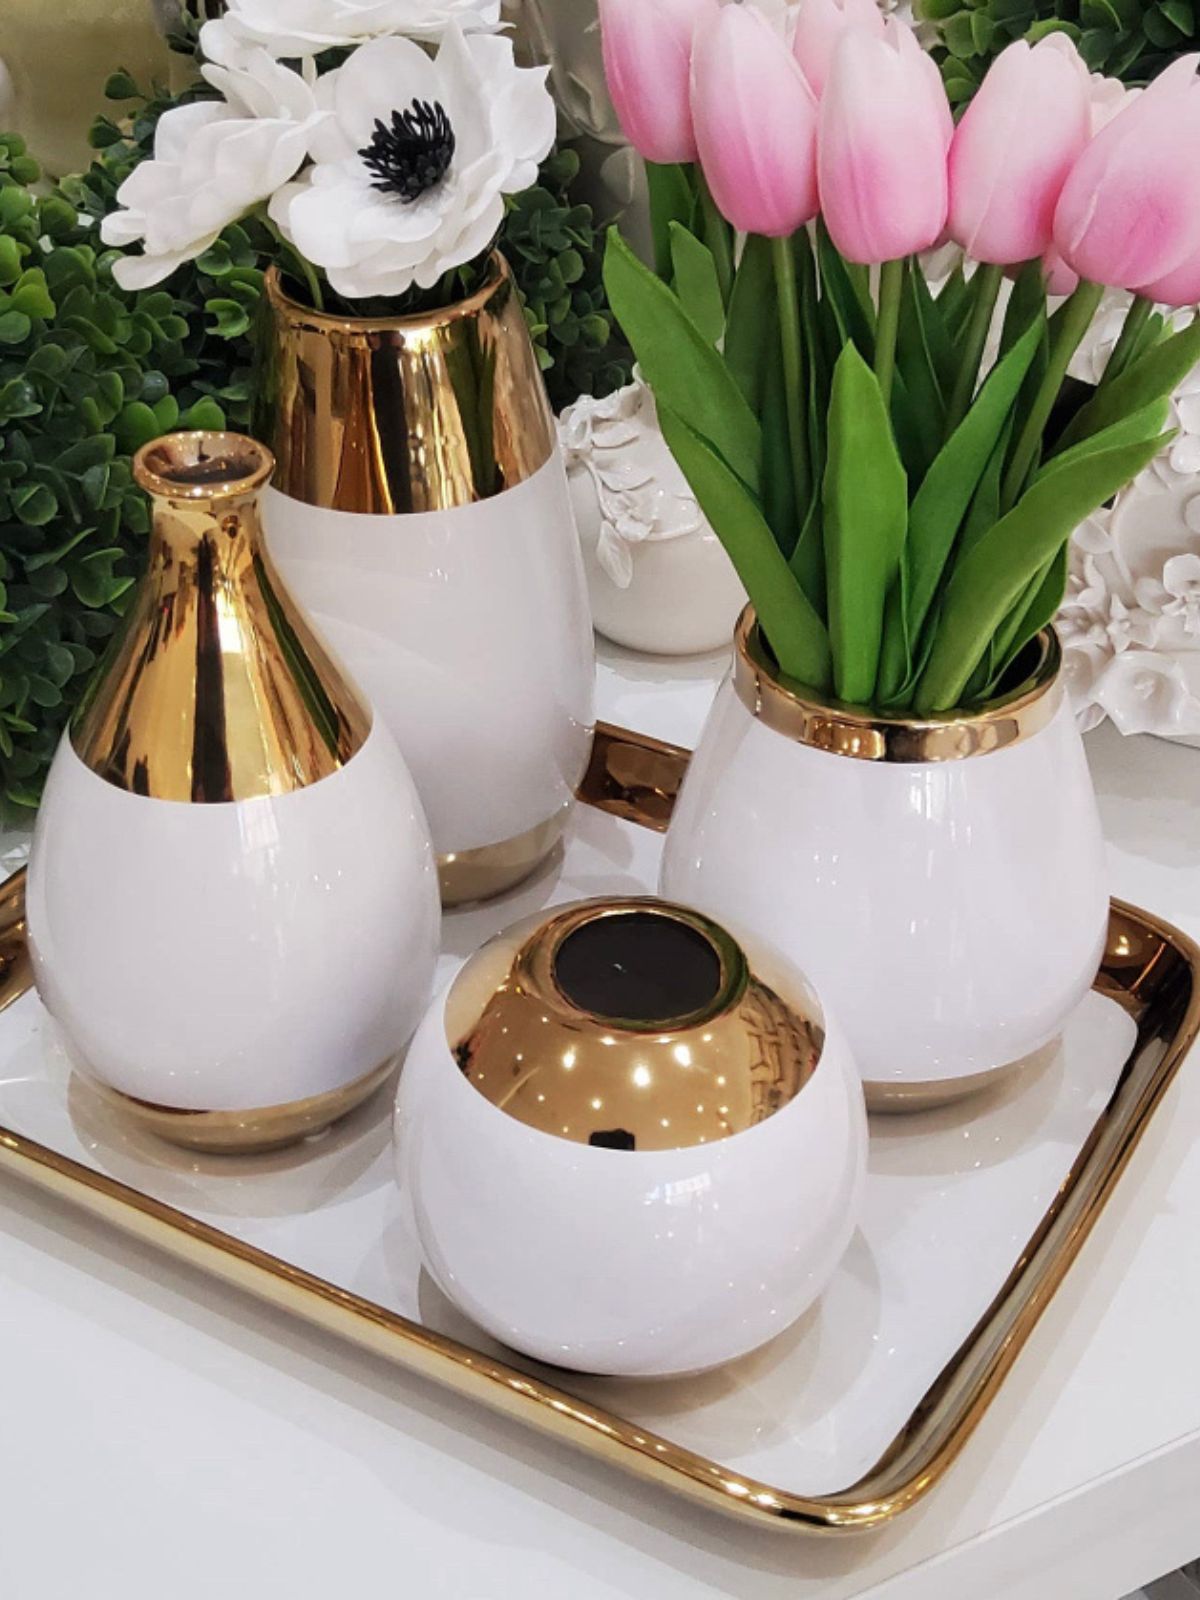 The Fior Collection of White and Gold Ceramic Vases With Diffusers - KYA Home Decor